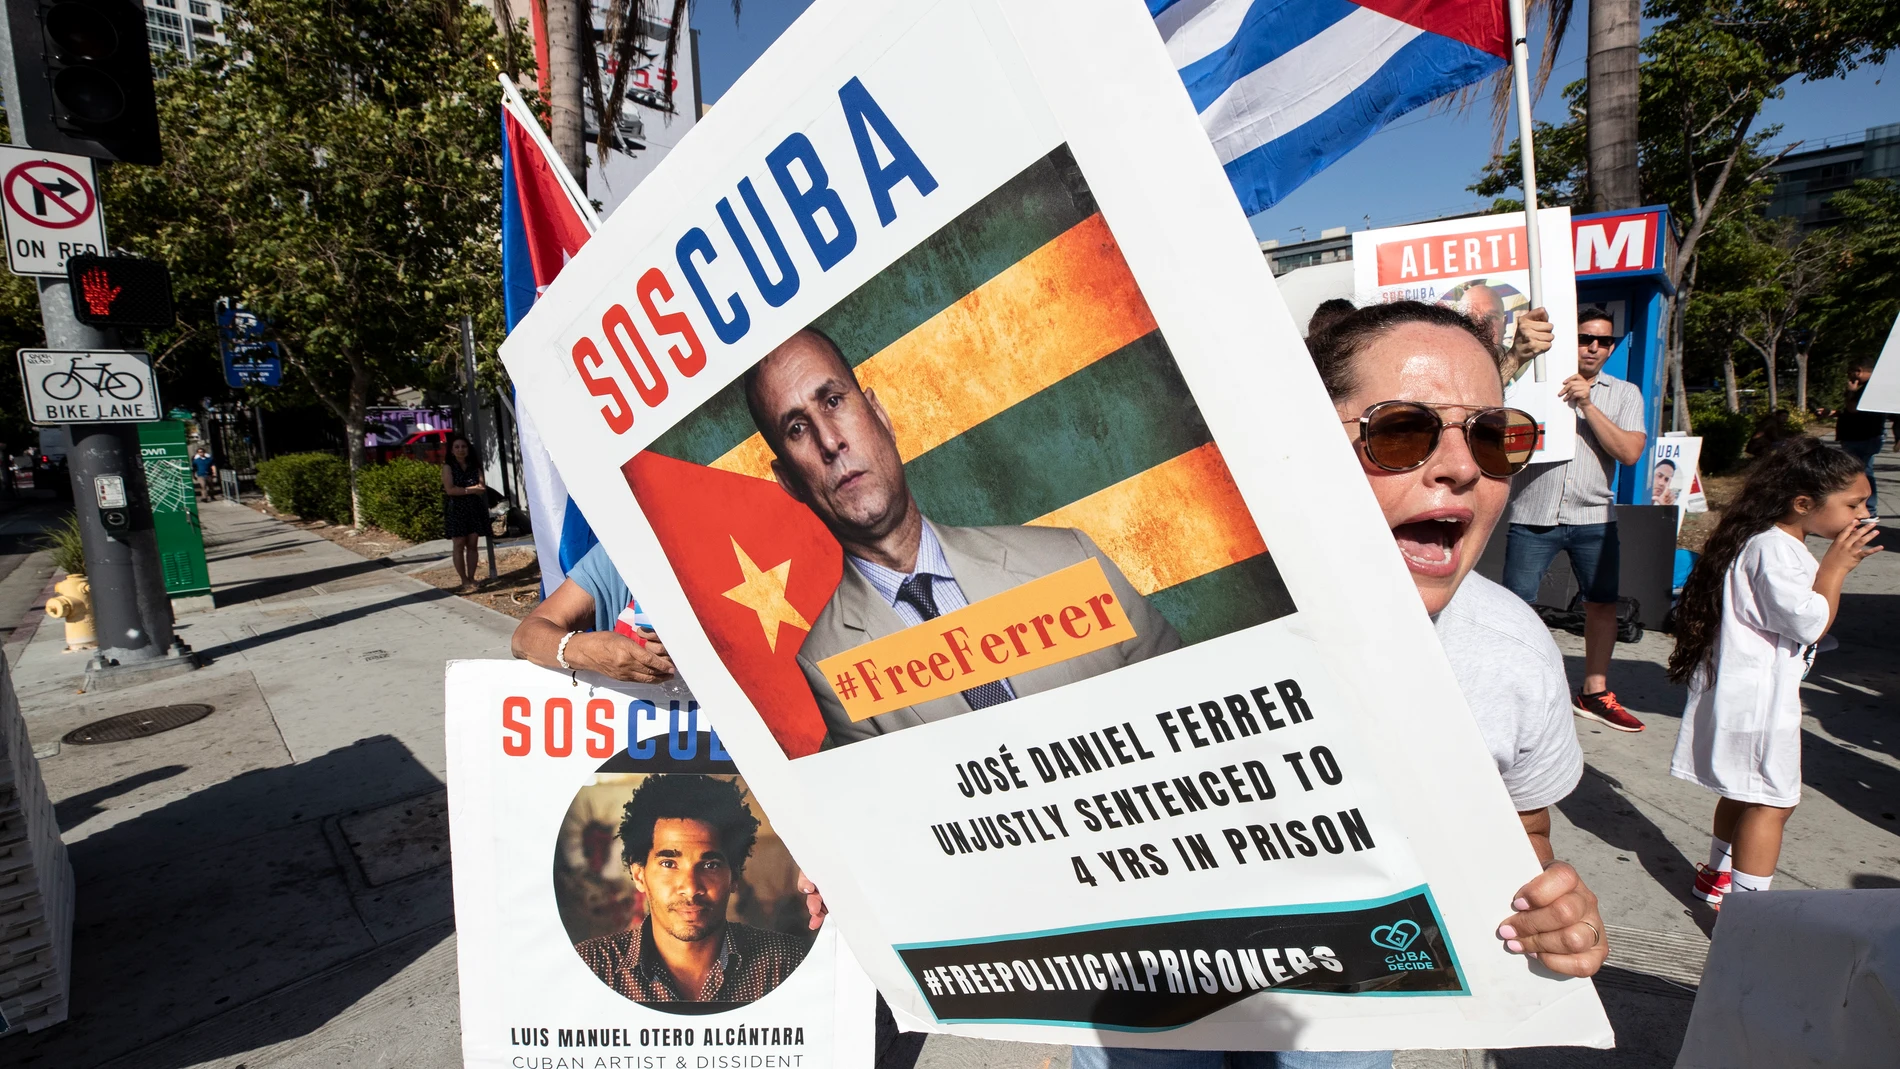 Los Angeles (United States), 08/06/2022.- A protester holds a poster reading 'SOS Cuba' and displays the portrait of a Cuban allegedly wrongfully imprisonned by the regime, as they gather in front of the Microsoft Theater, where leaders and heads of delegations arrive for the inaugural ceremony of the 2022 Summit of the Americas, in Los Angeles, California, USA, 08 June 2022. (Protestas, Estados Unidos) EFE/EPA/ETIENNE LAURENT